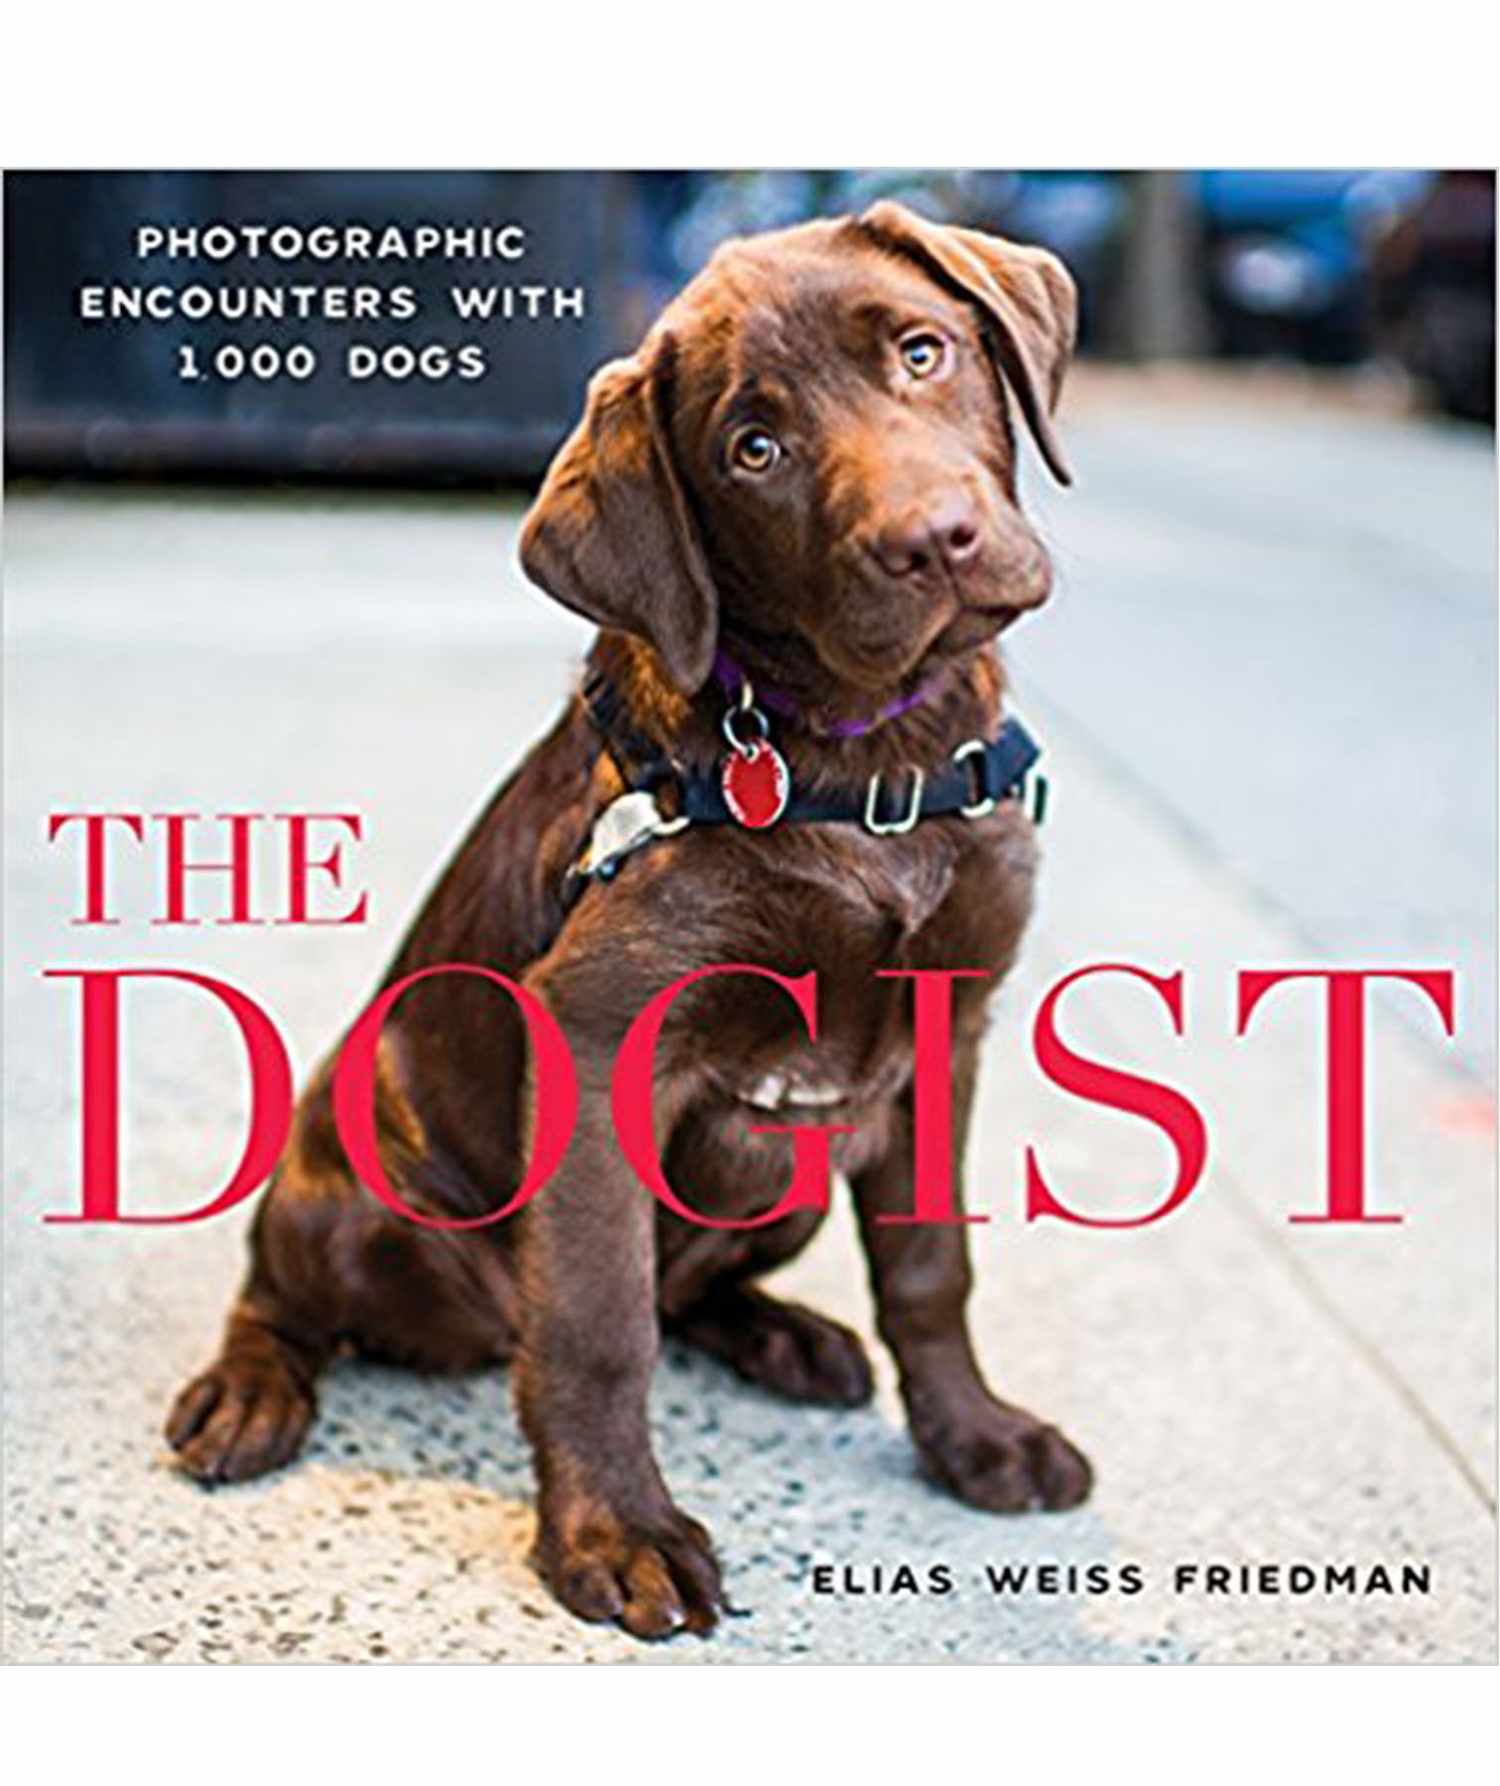 The Dogist, by Elias Weiss Friedman